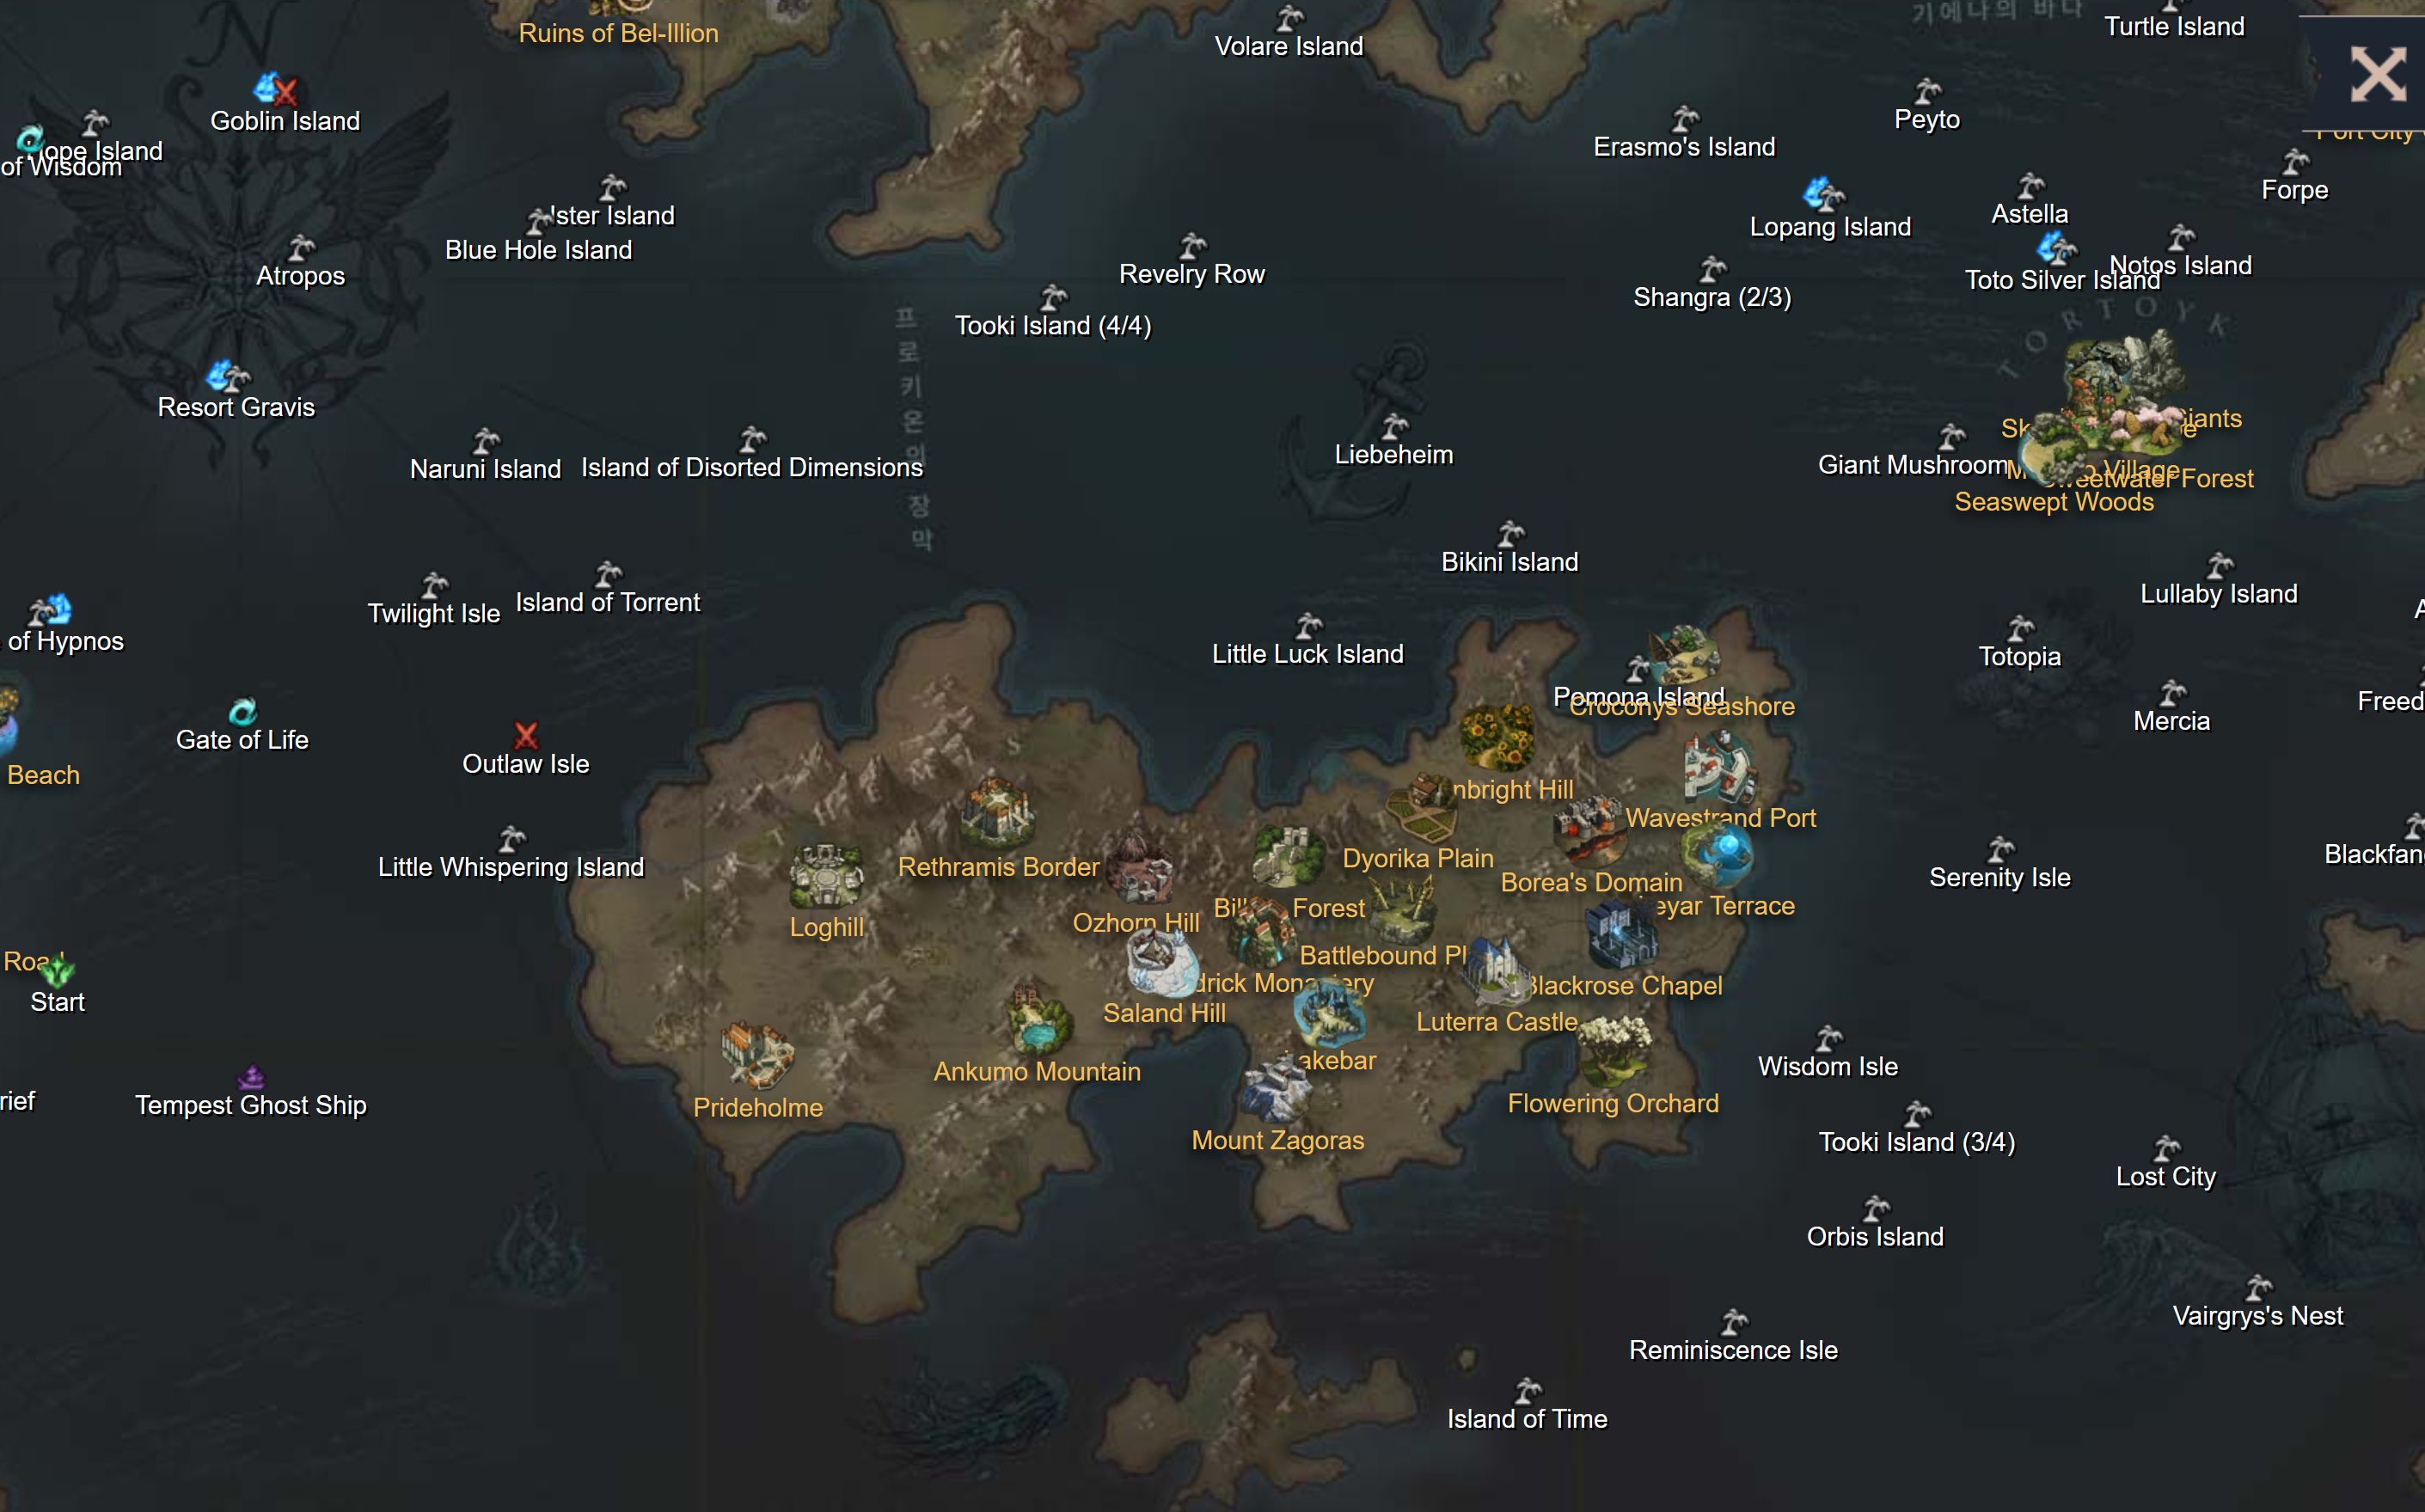 Interactive Map - Lost Ark Database